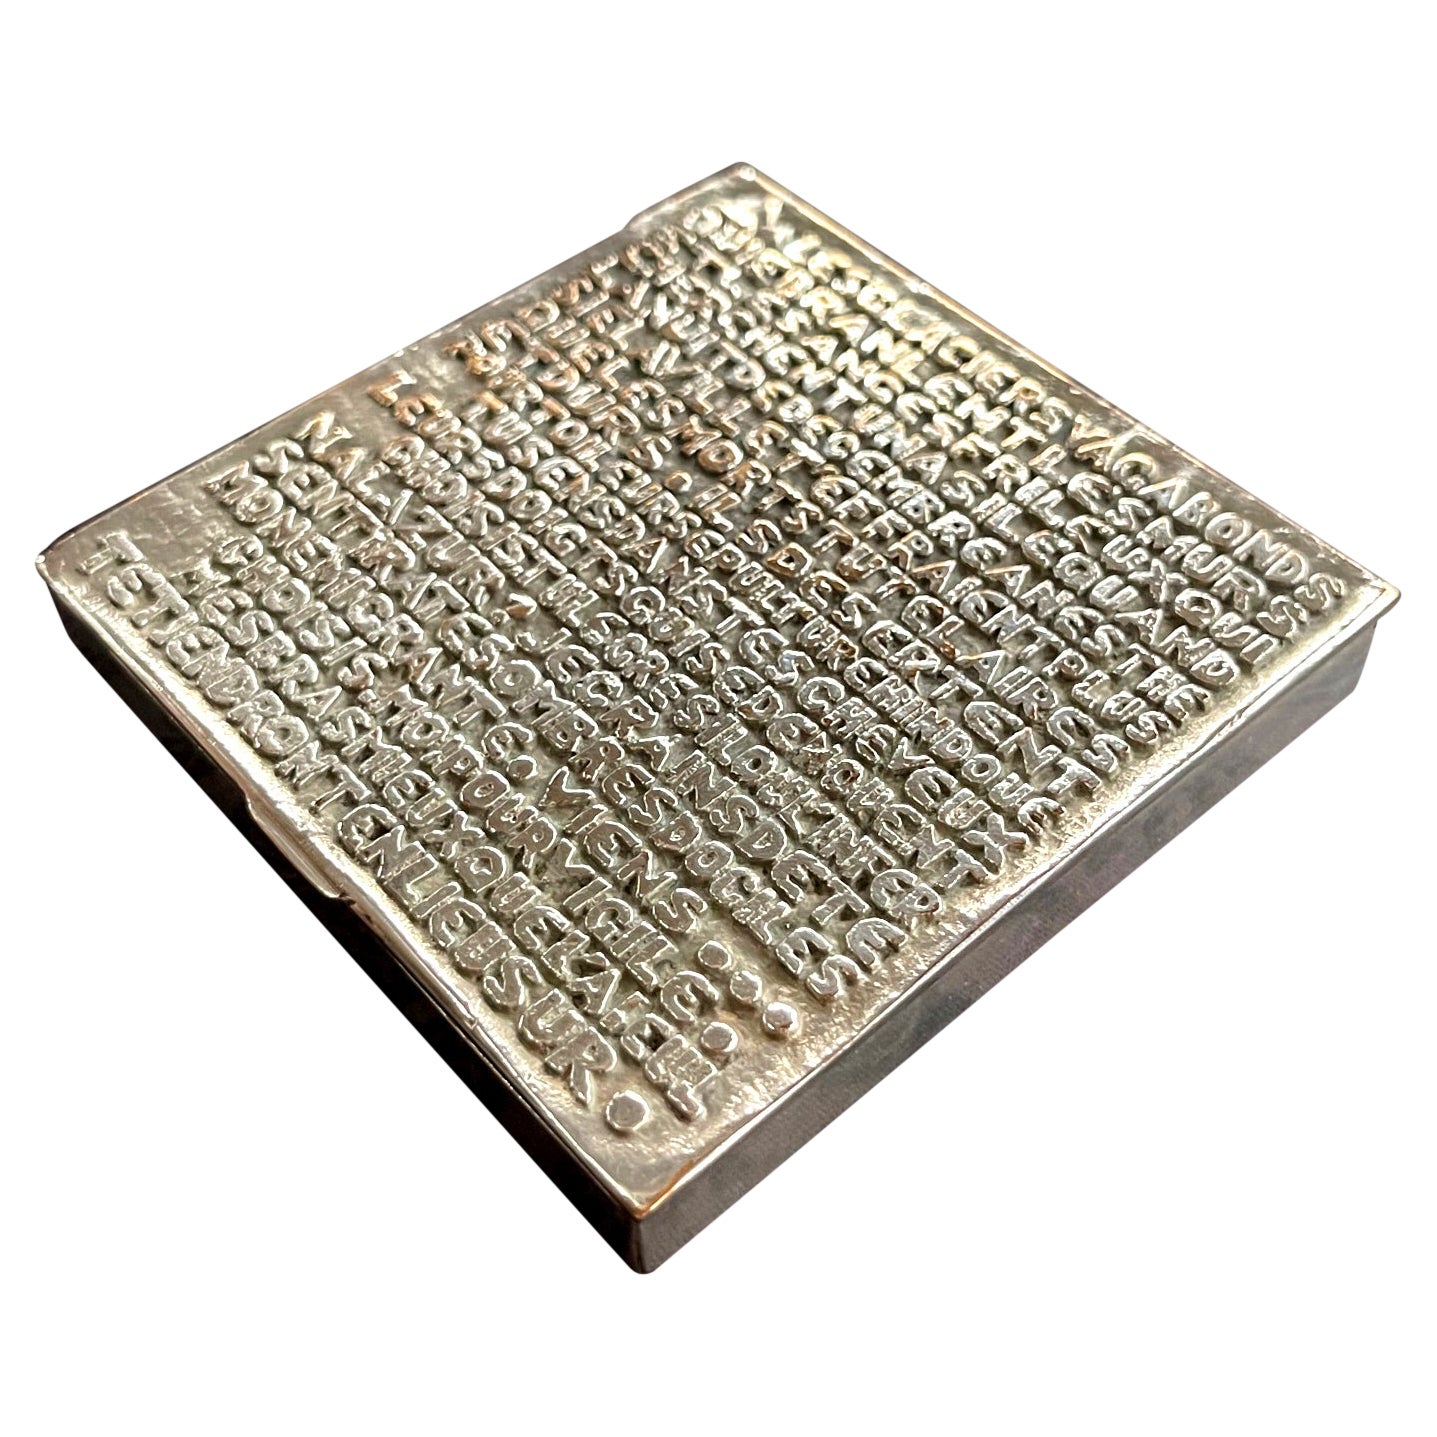 Silvered Bronze Box with Relief Cast Poem by Line Vautrin